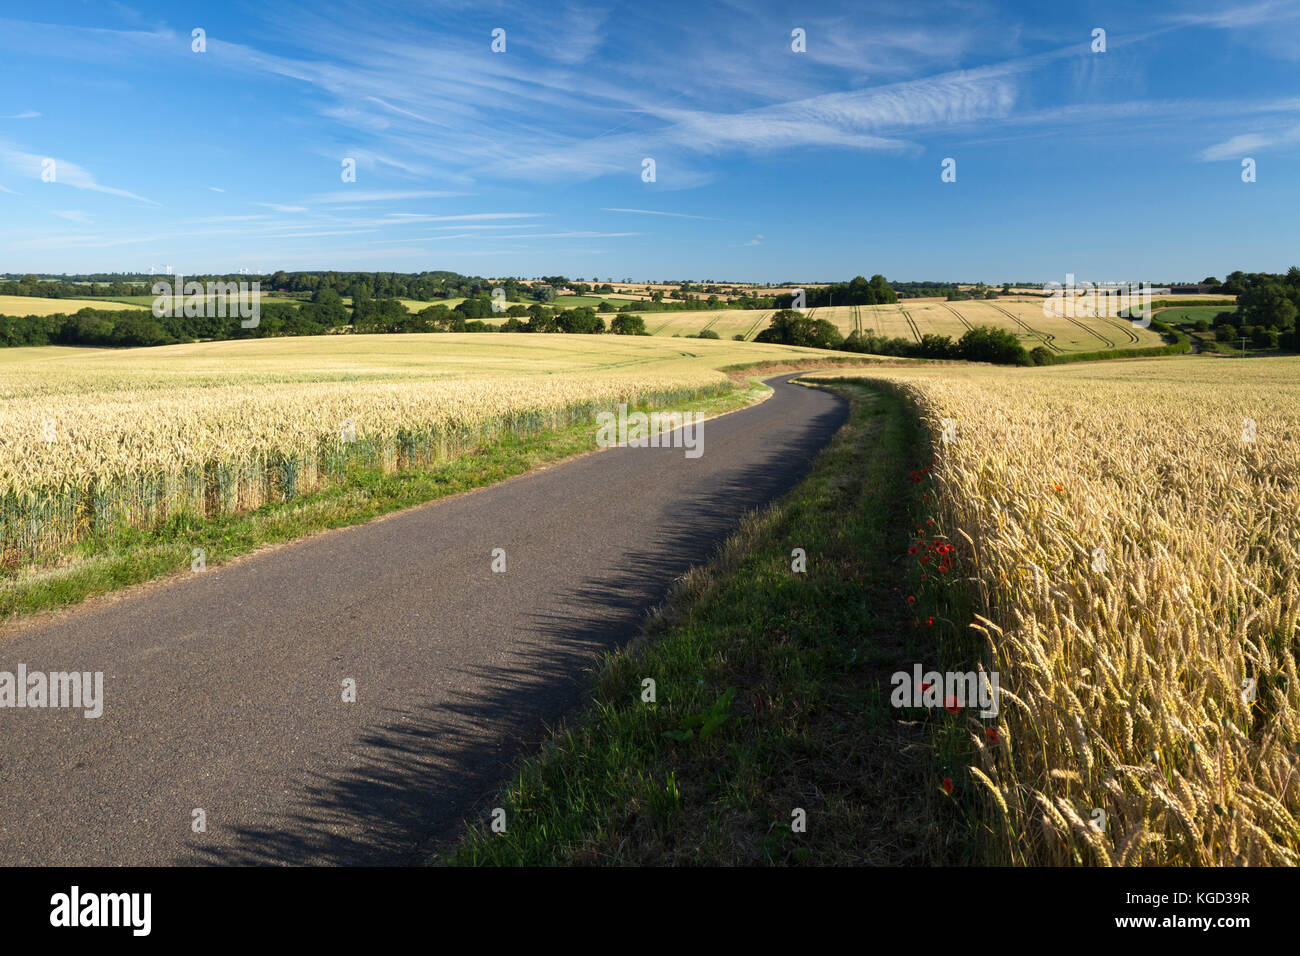 A single track road winds its way between fields of ripening wheat. Stock Photo